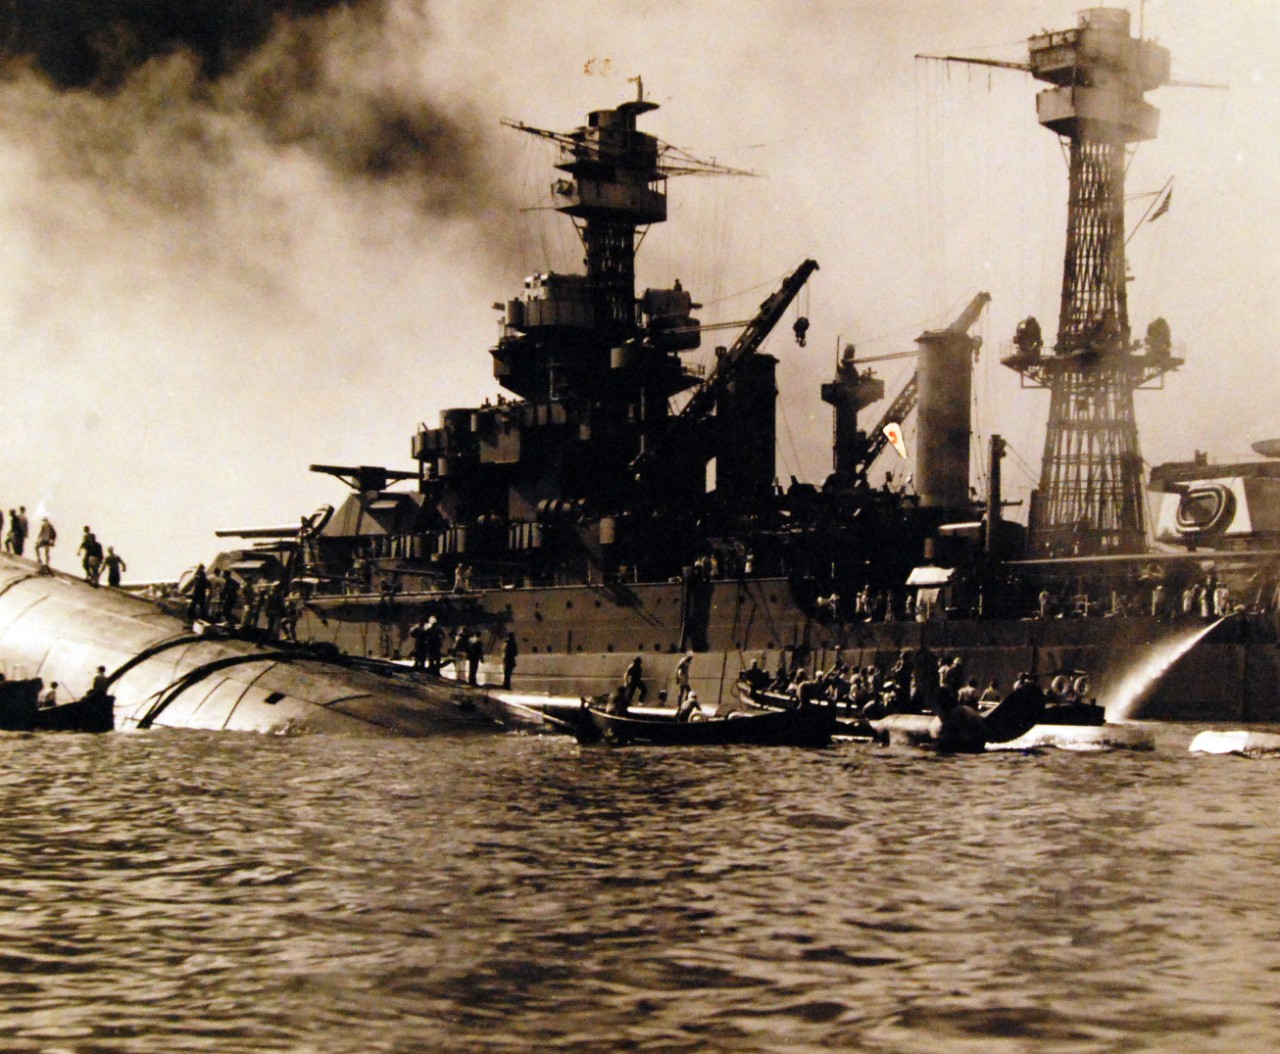 80-G-32748:   Japanese Attack on Pearl Harbor, December 7, 1941.   The capsized USS Oklahoma (BB 37) and USS Maryland (BB 46) are shown after the attack. Official U.S. Navy photograph, now in the collections of the National Archives. (9/9/2015).